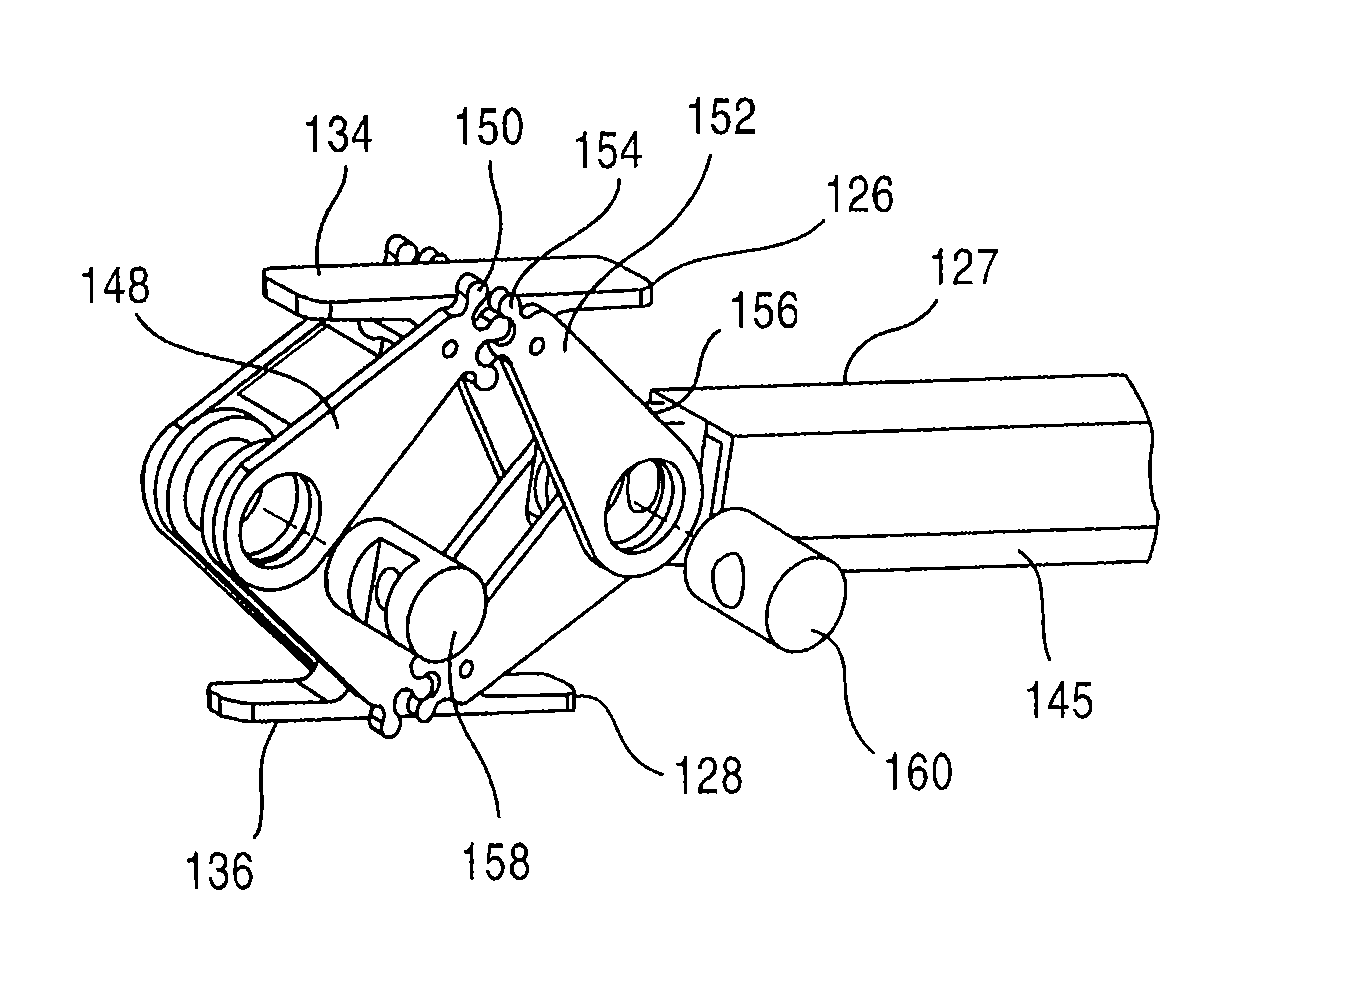 Apparatus having at least one actuatable planar surface and method using the same for a spinal procedure